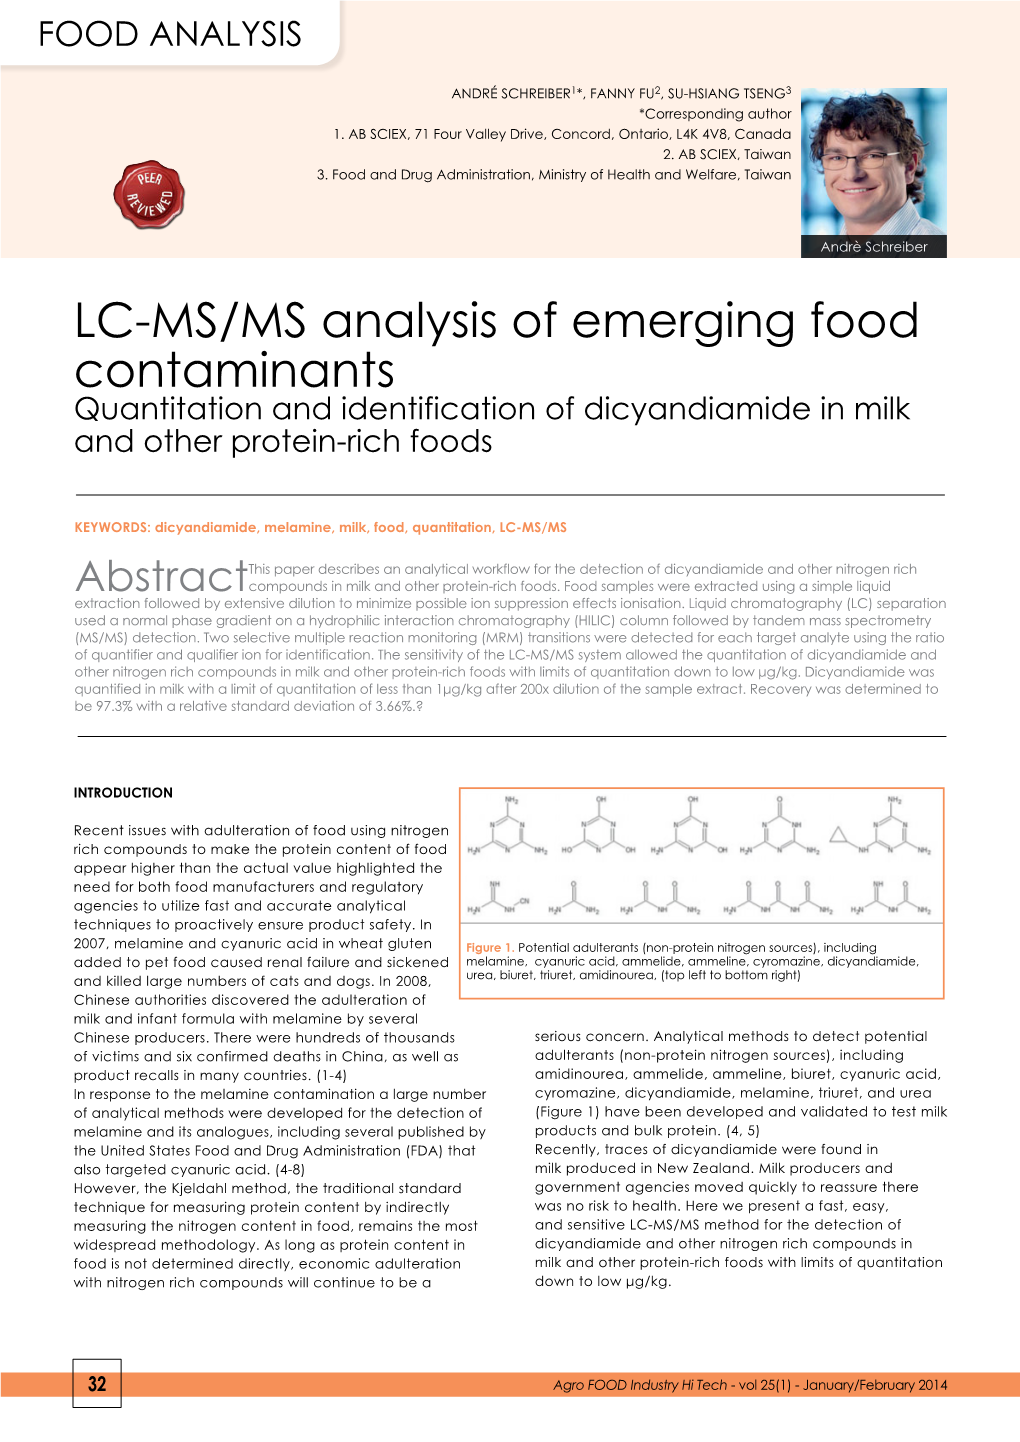 LC-MS/MS Analysis of Emerging Food Contaminants Quantitation and Identification of Dicyandiamide in Milk and Other Protein-Rich Foods